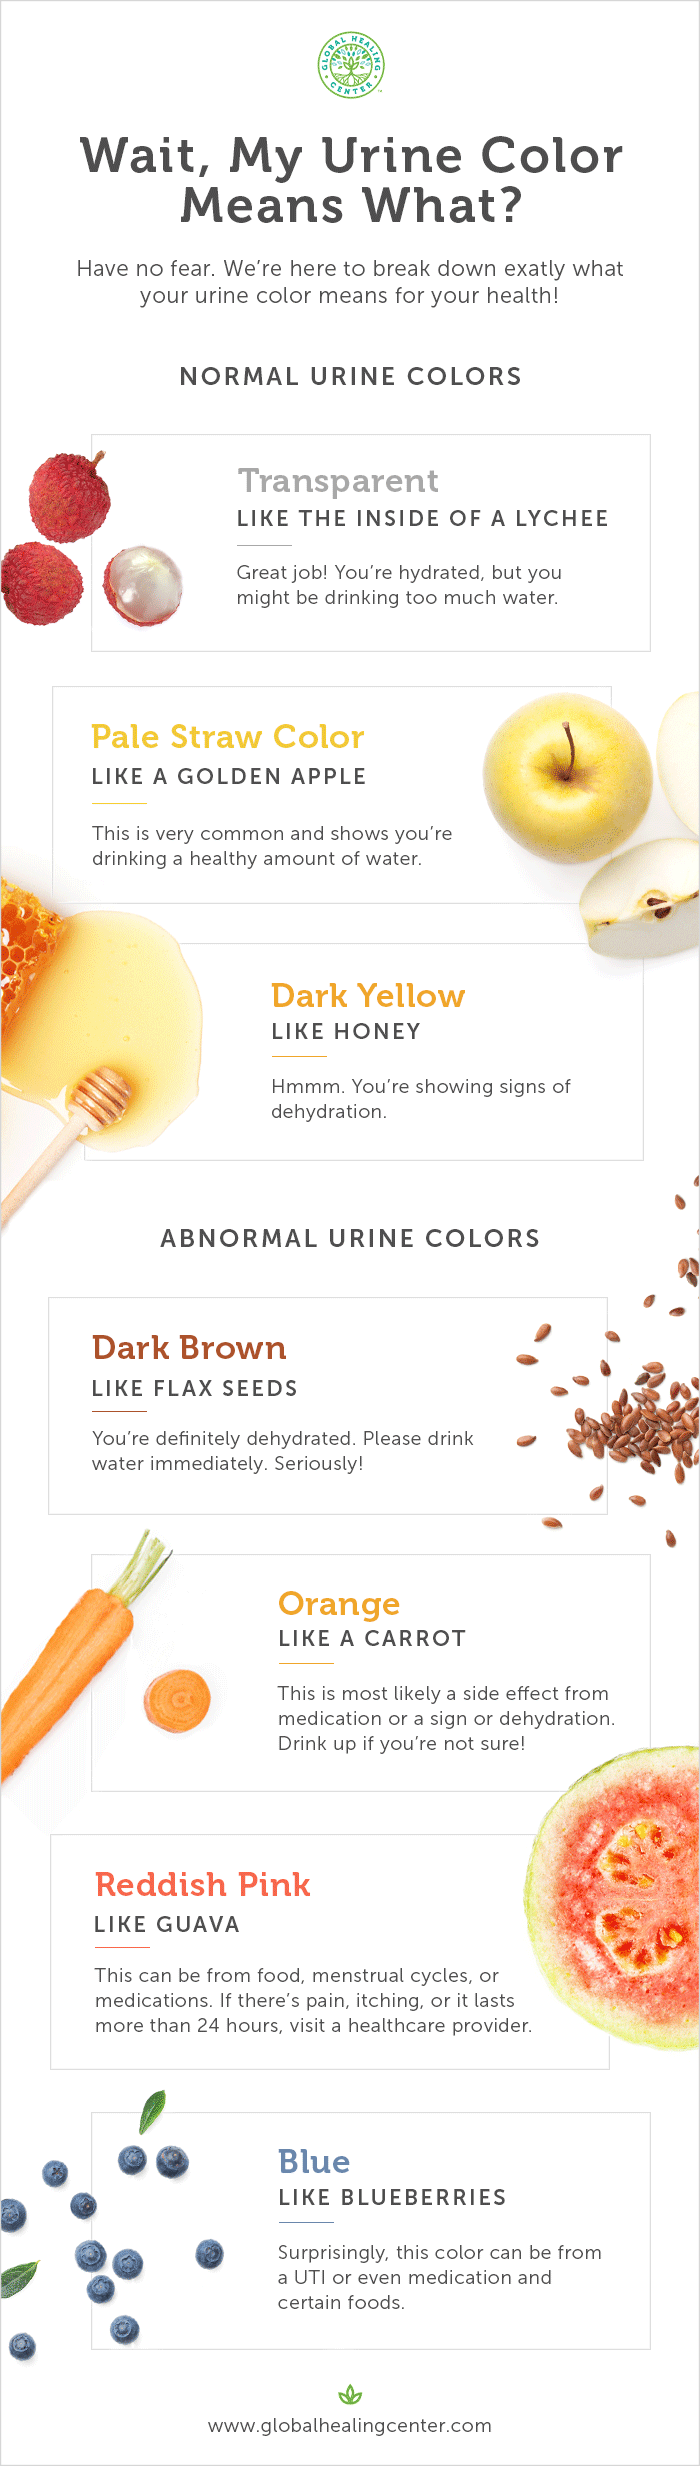 Why is my urine orange/yellow in color? After 5 seconds, it turns